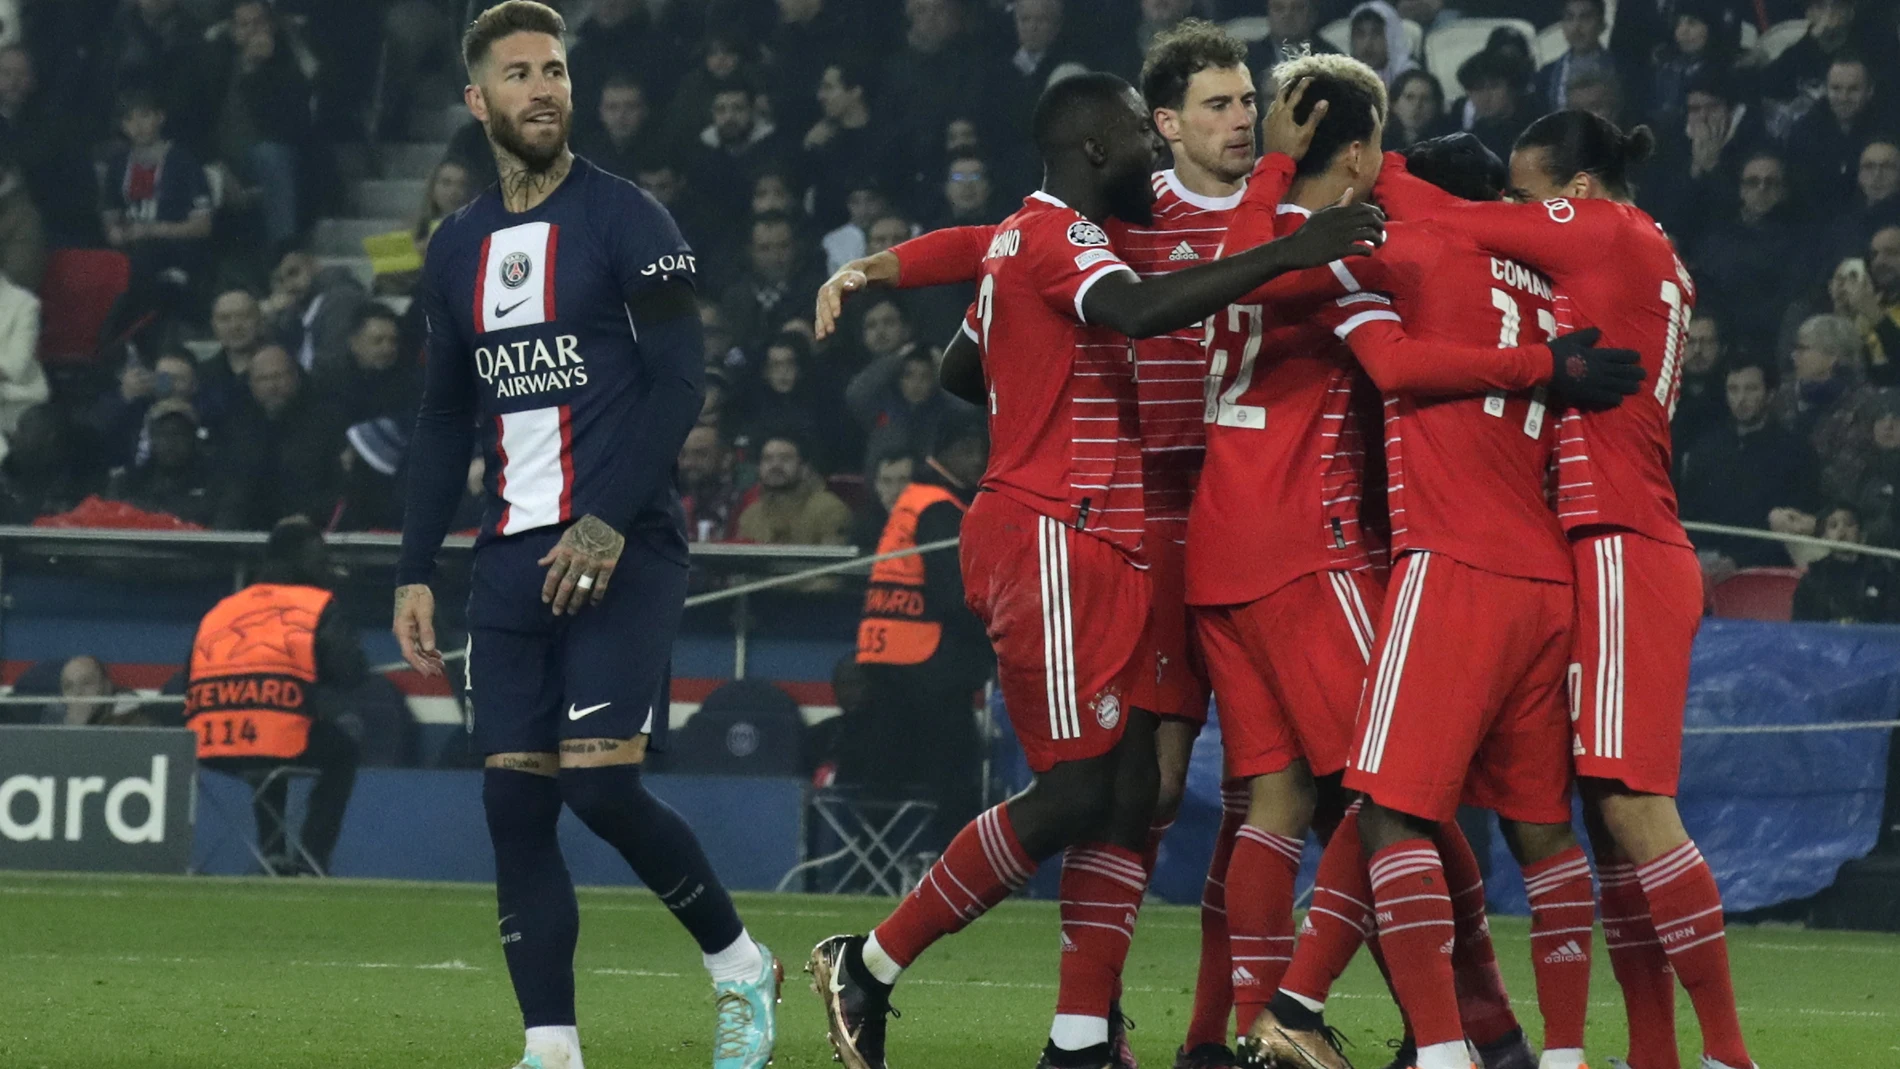 Paris (France), 14/02/2023.- Players of Bayern Munich celebrate after the 1-0 scored by Kingsley Coman as Sergio Ramos of PSG (L) looks on during the UEFA Champions League Round of 16, 1st leg match between Paris Saint-Germain and Bayern Munich in Paris, France, 14 February 2023. (Liga de Campeones, Francia) EFE/EPA/TERESA SUAREZ 